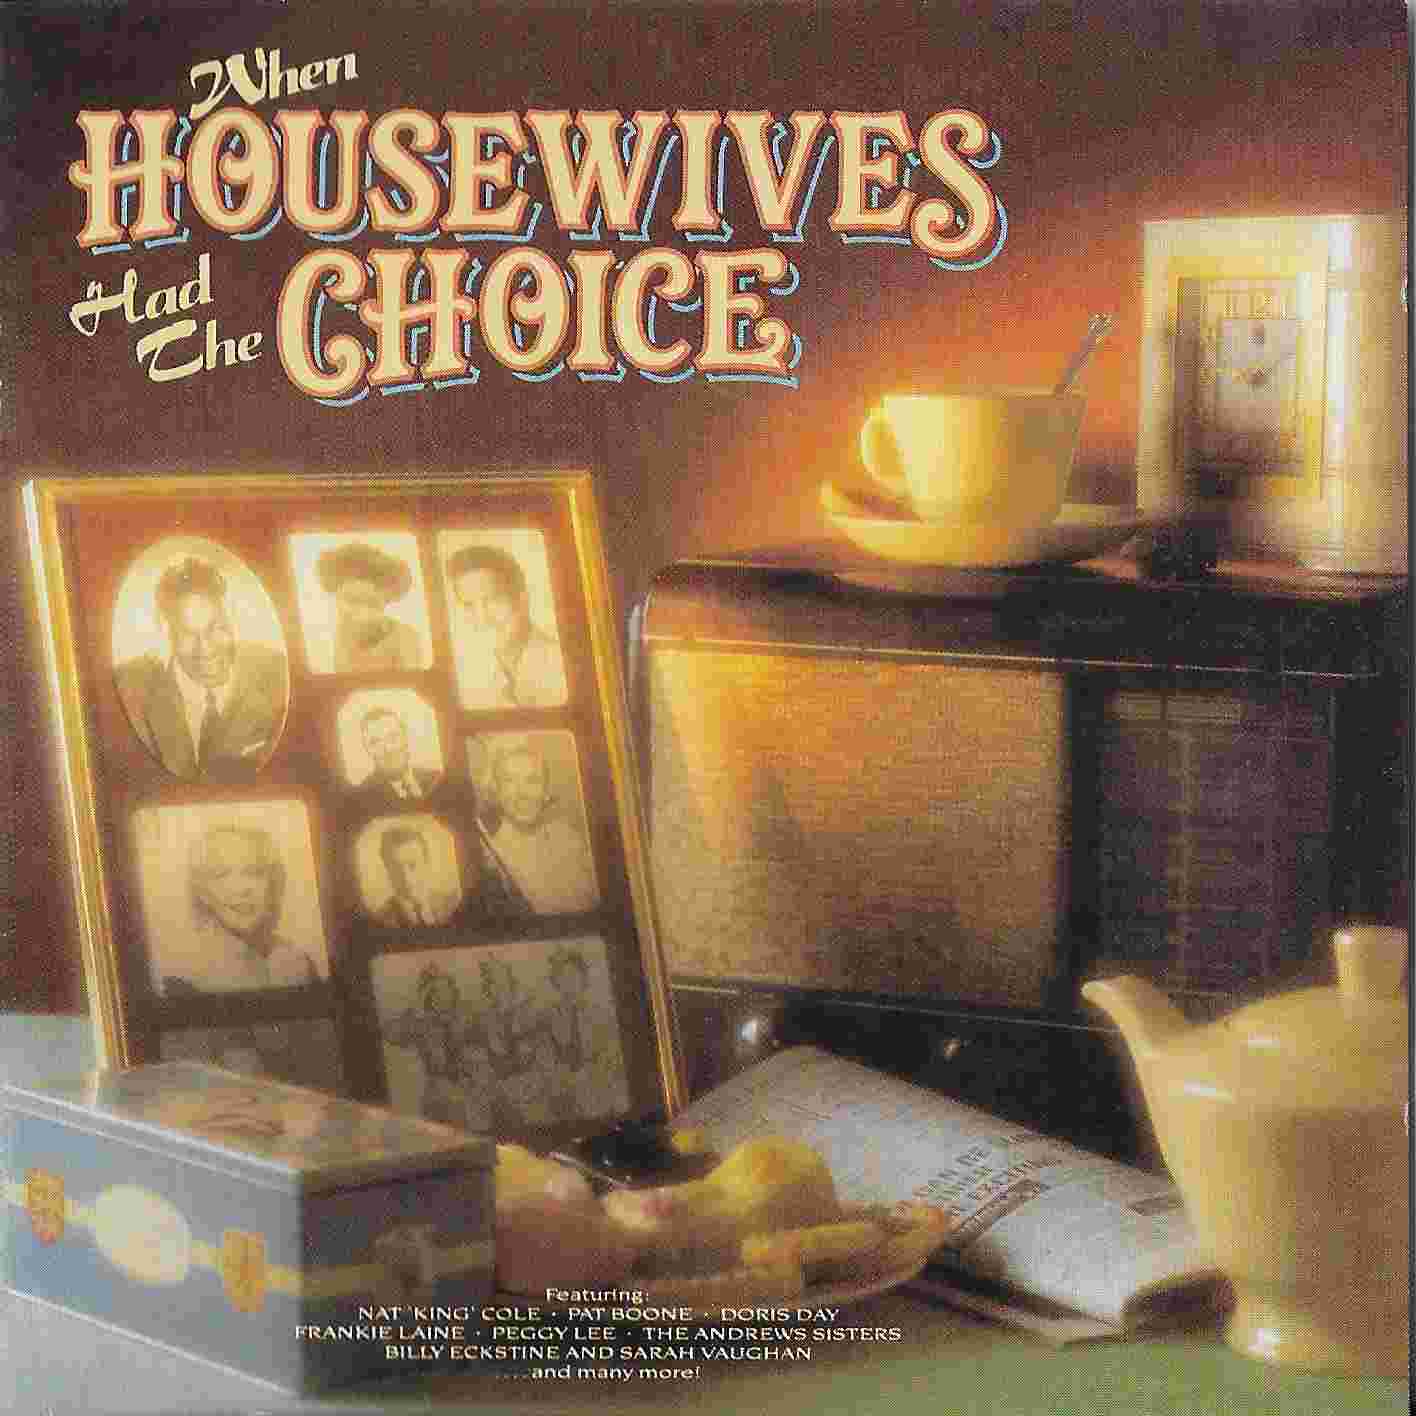 Picture of BBCCD730 When housewives had the choice by artist Various from the BBC cds - Records and Tapes library